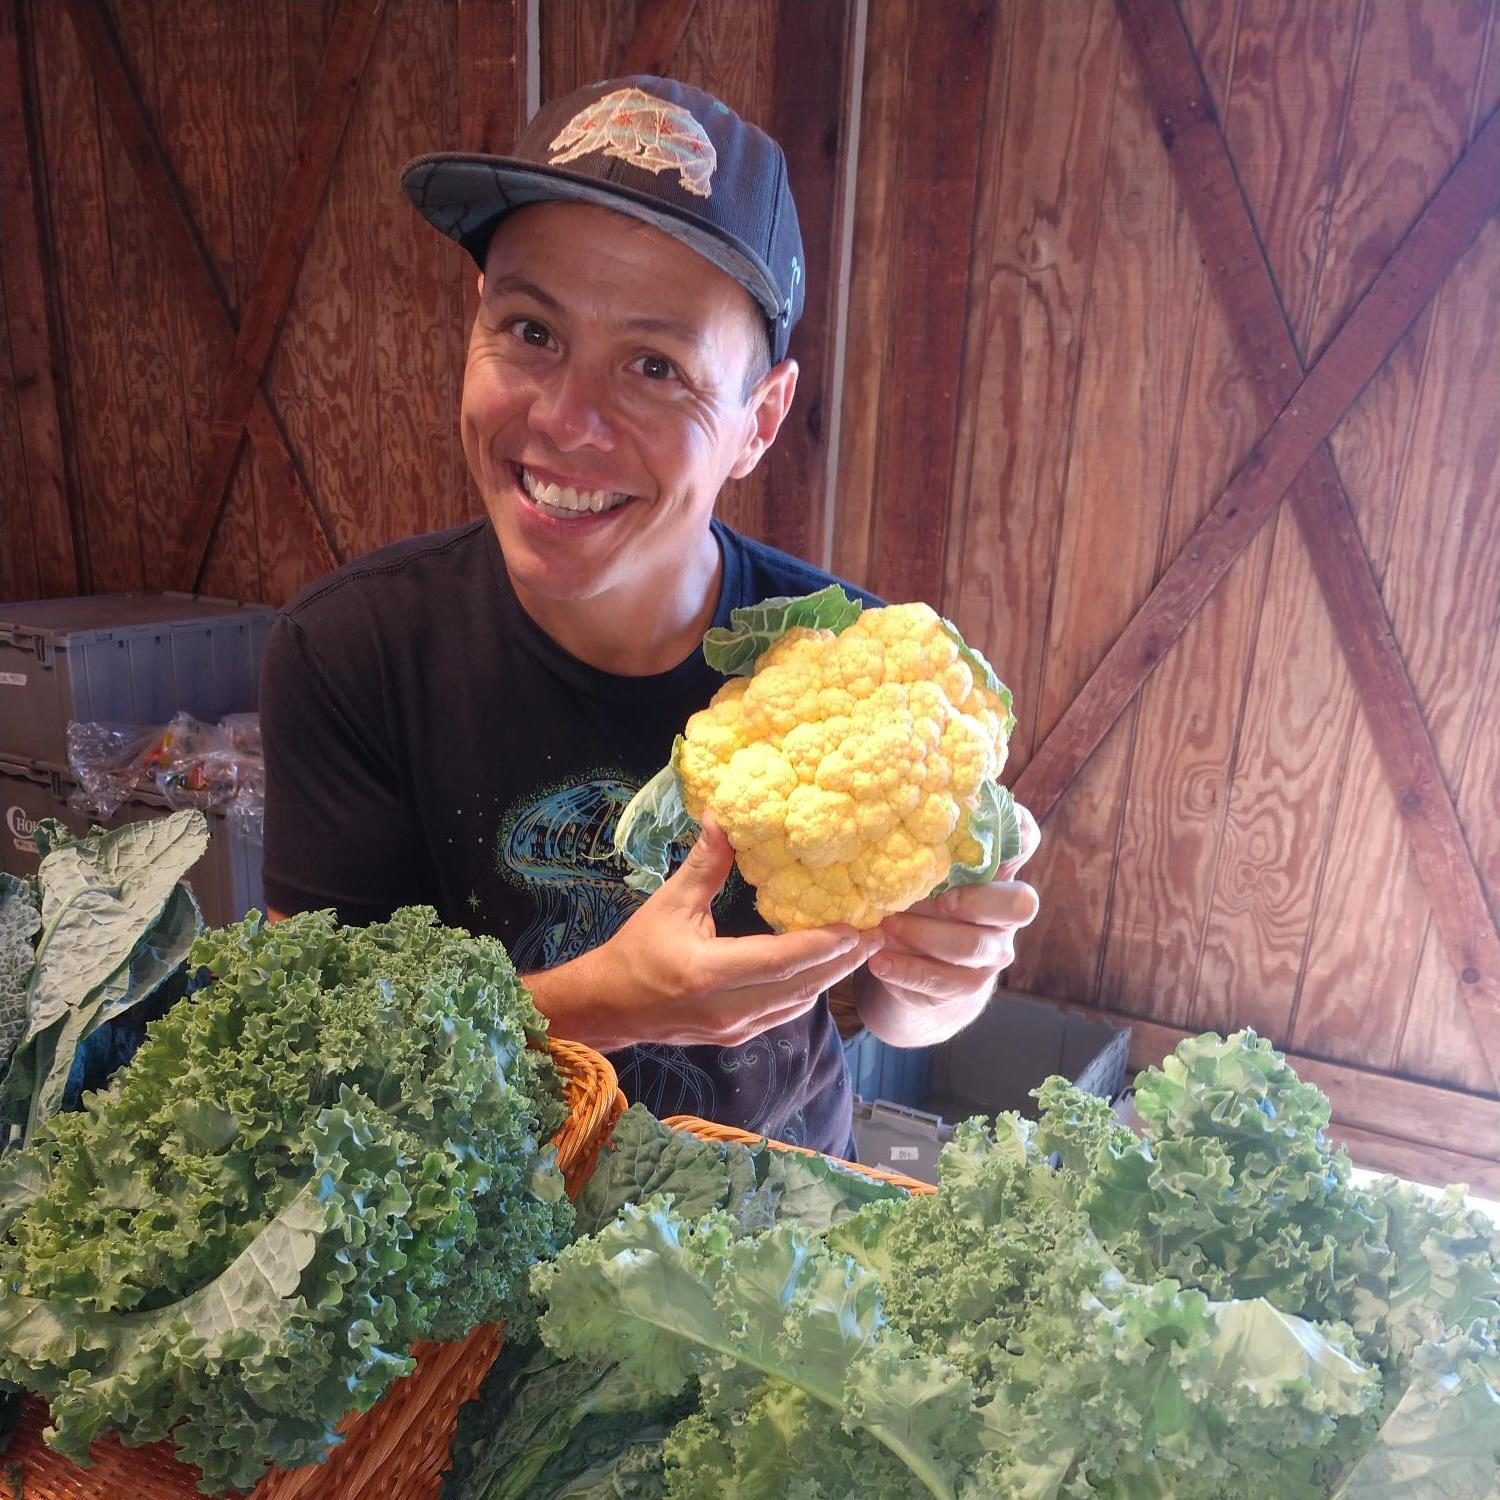 JJ Neville holding up a cheddar cauliflower. There are other greens on a table in front of him